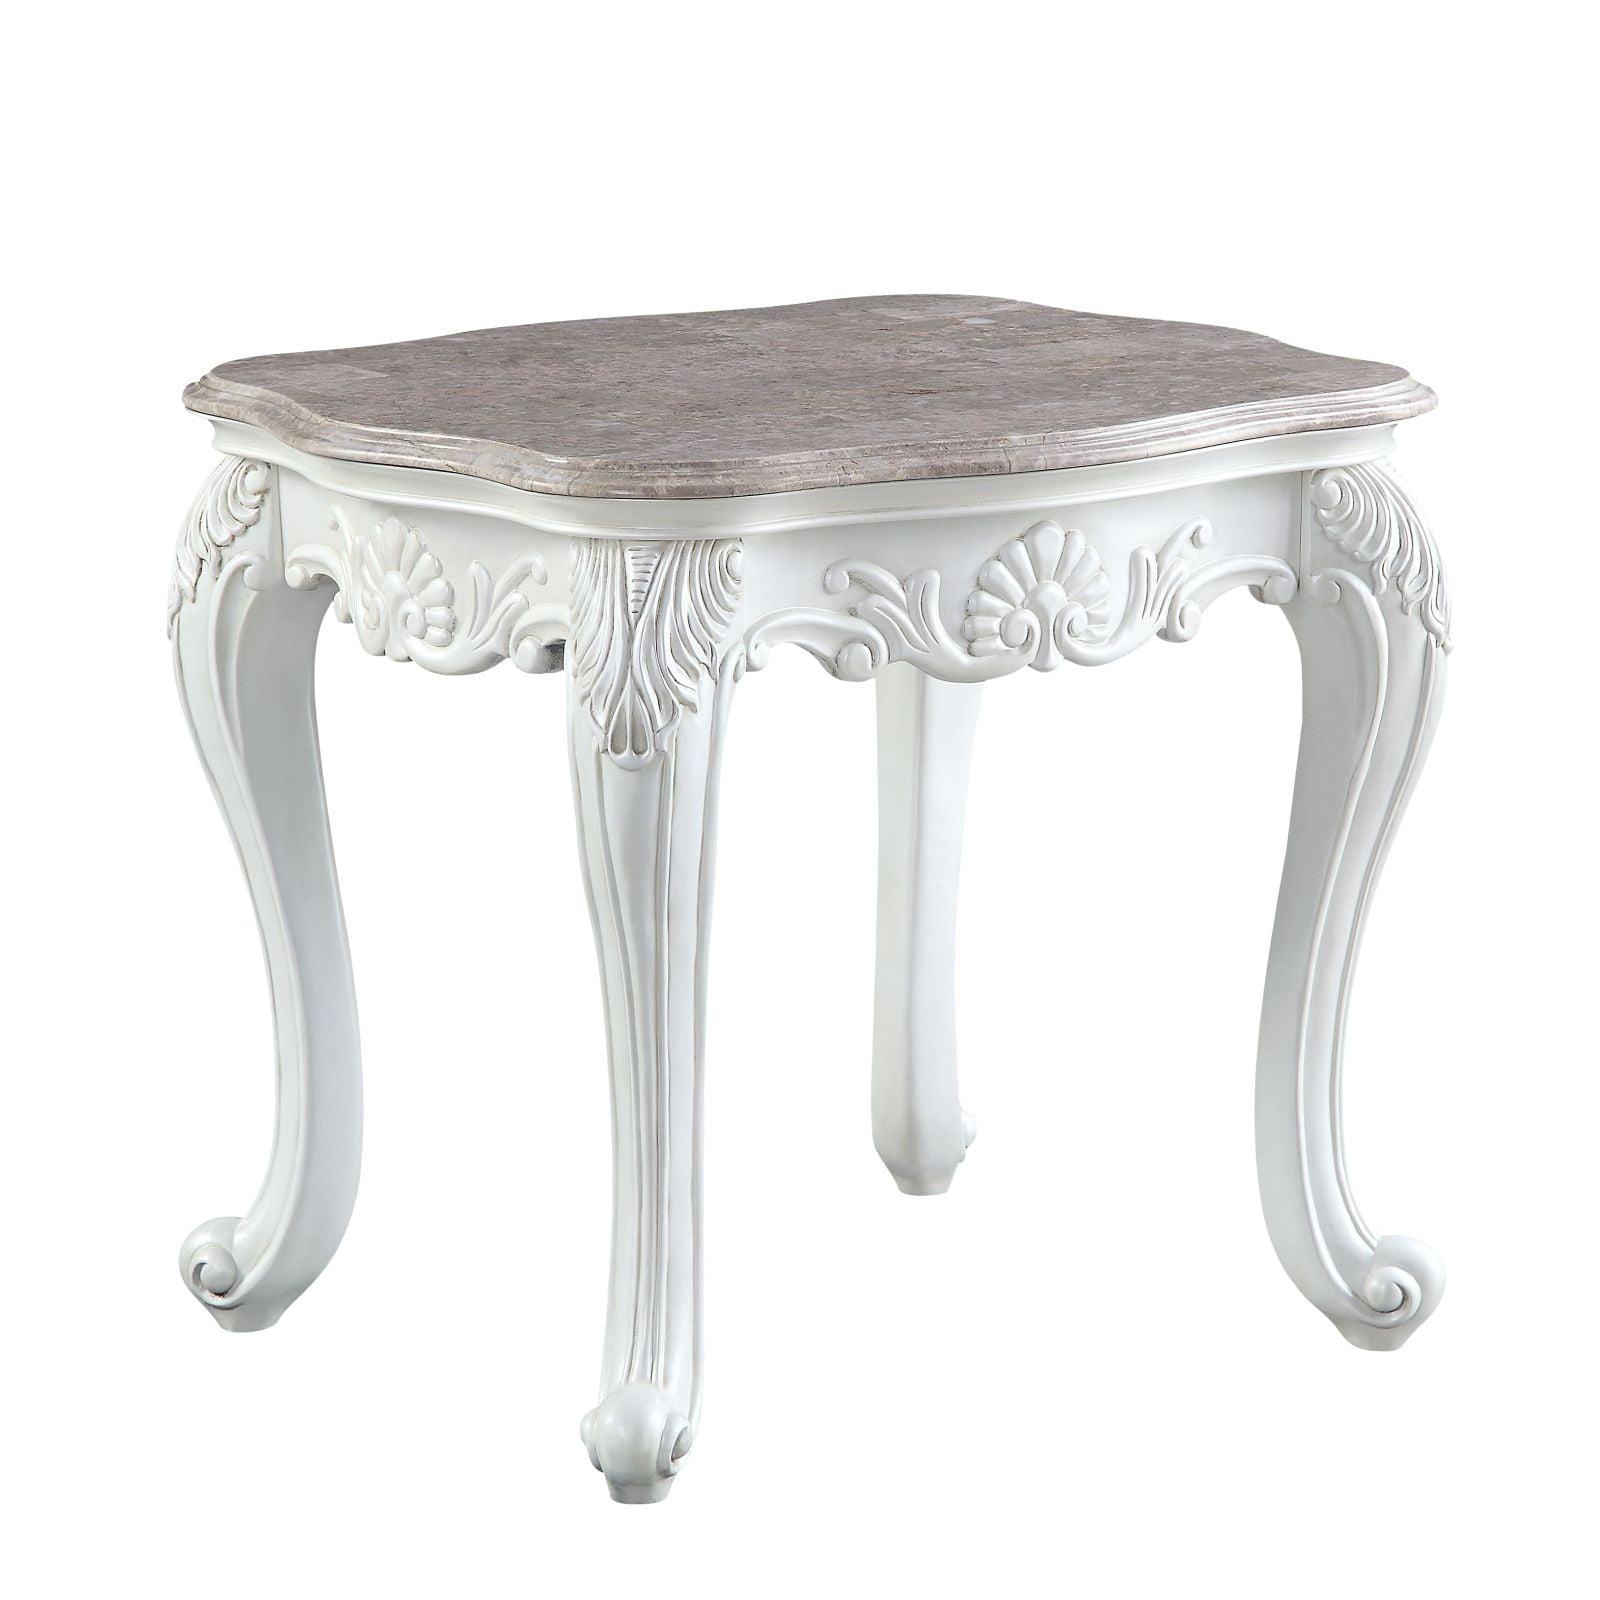 Classic White Marble Top & Wooden Base Rectangular Coffee Table